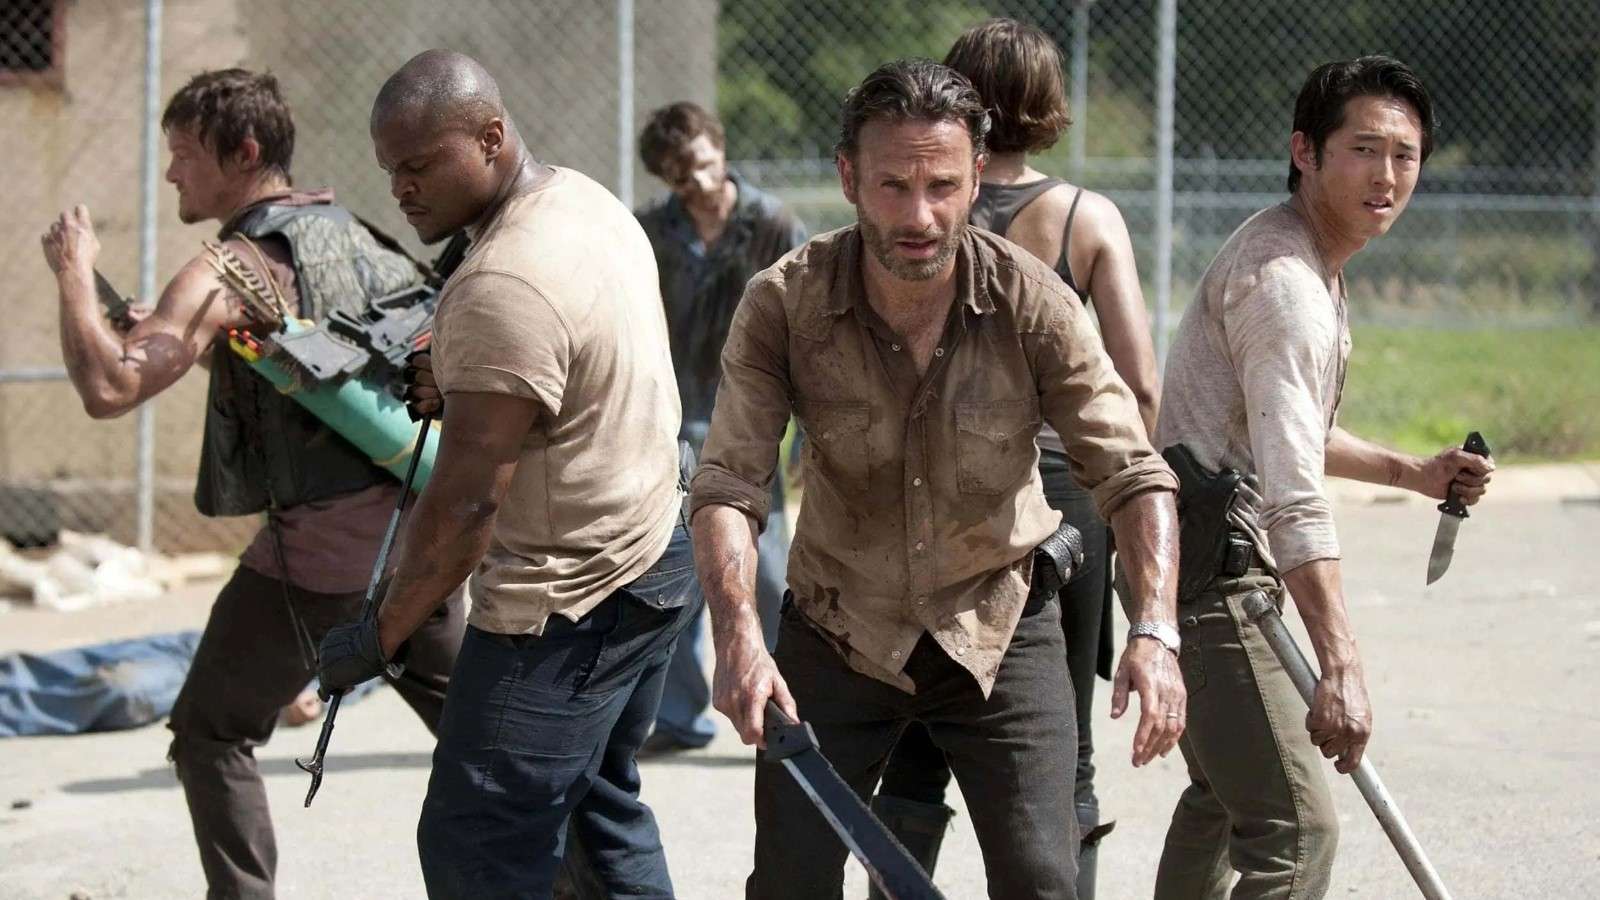 The Walking Dead: Rick stands with his group in a prison yard, in fighting stance